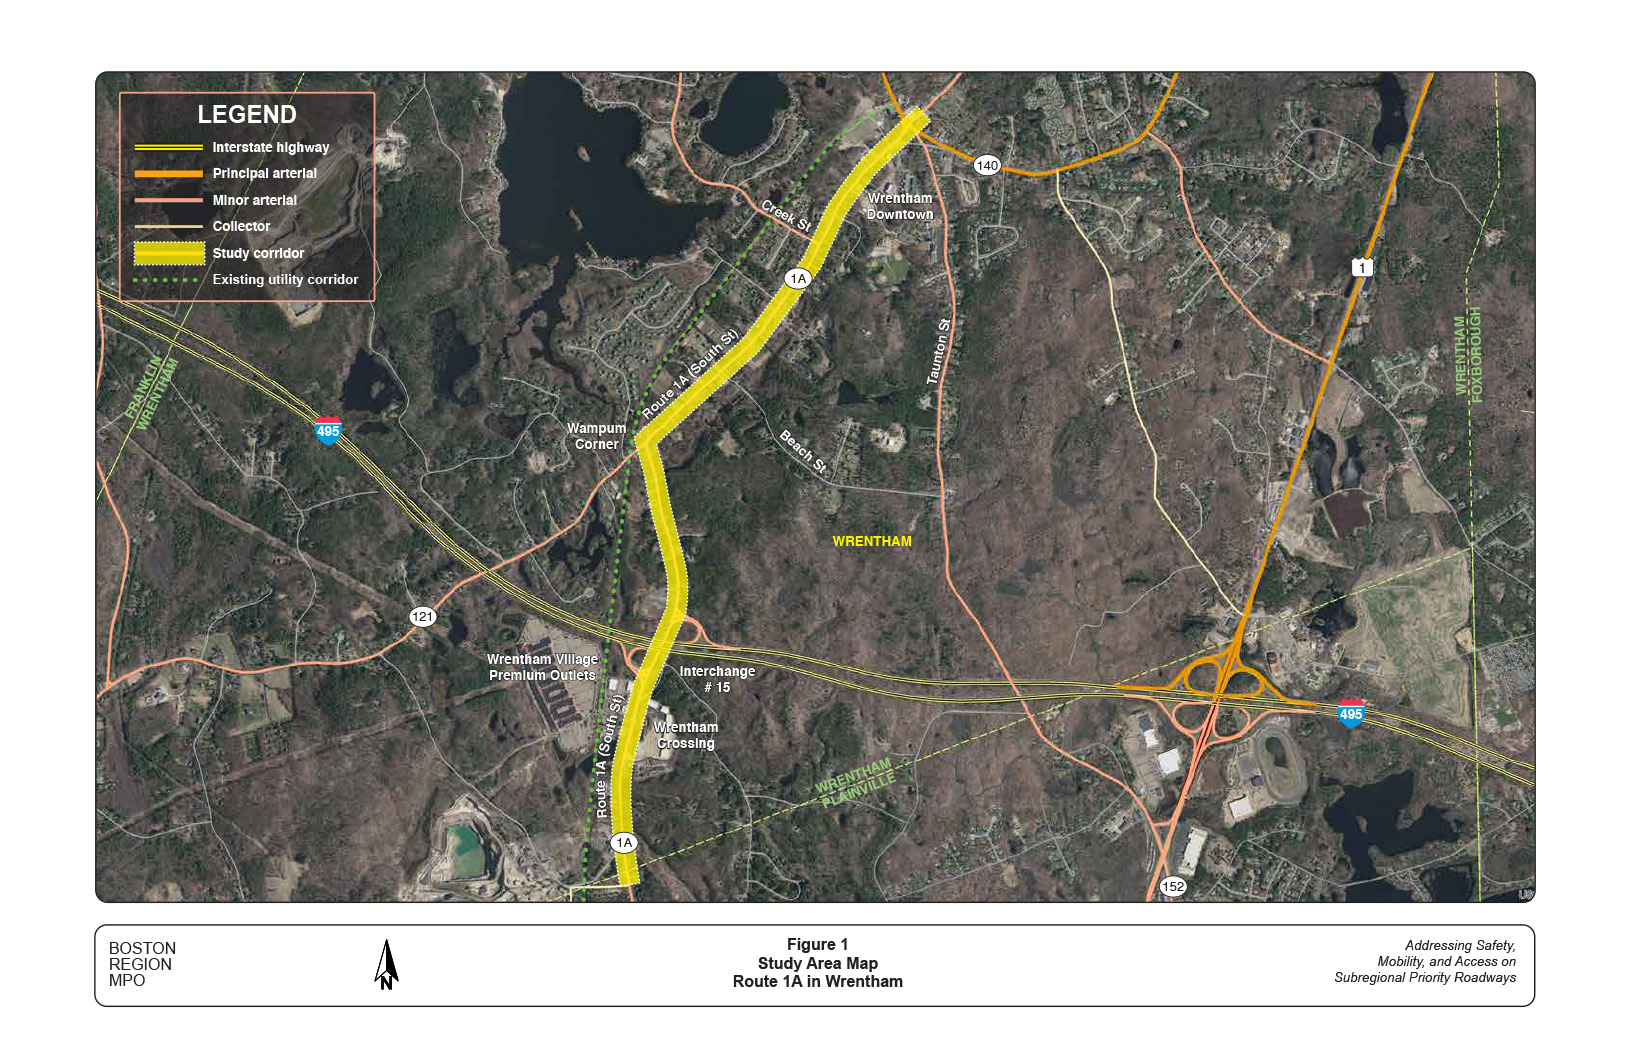 Figure 1 is a map showing the study area, the Route 1A corridor in Wrentham.